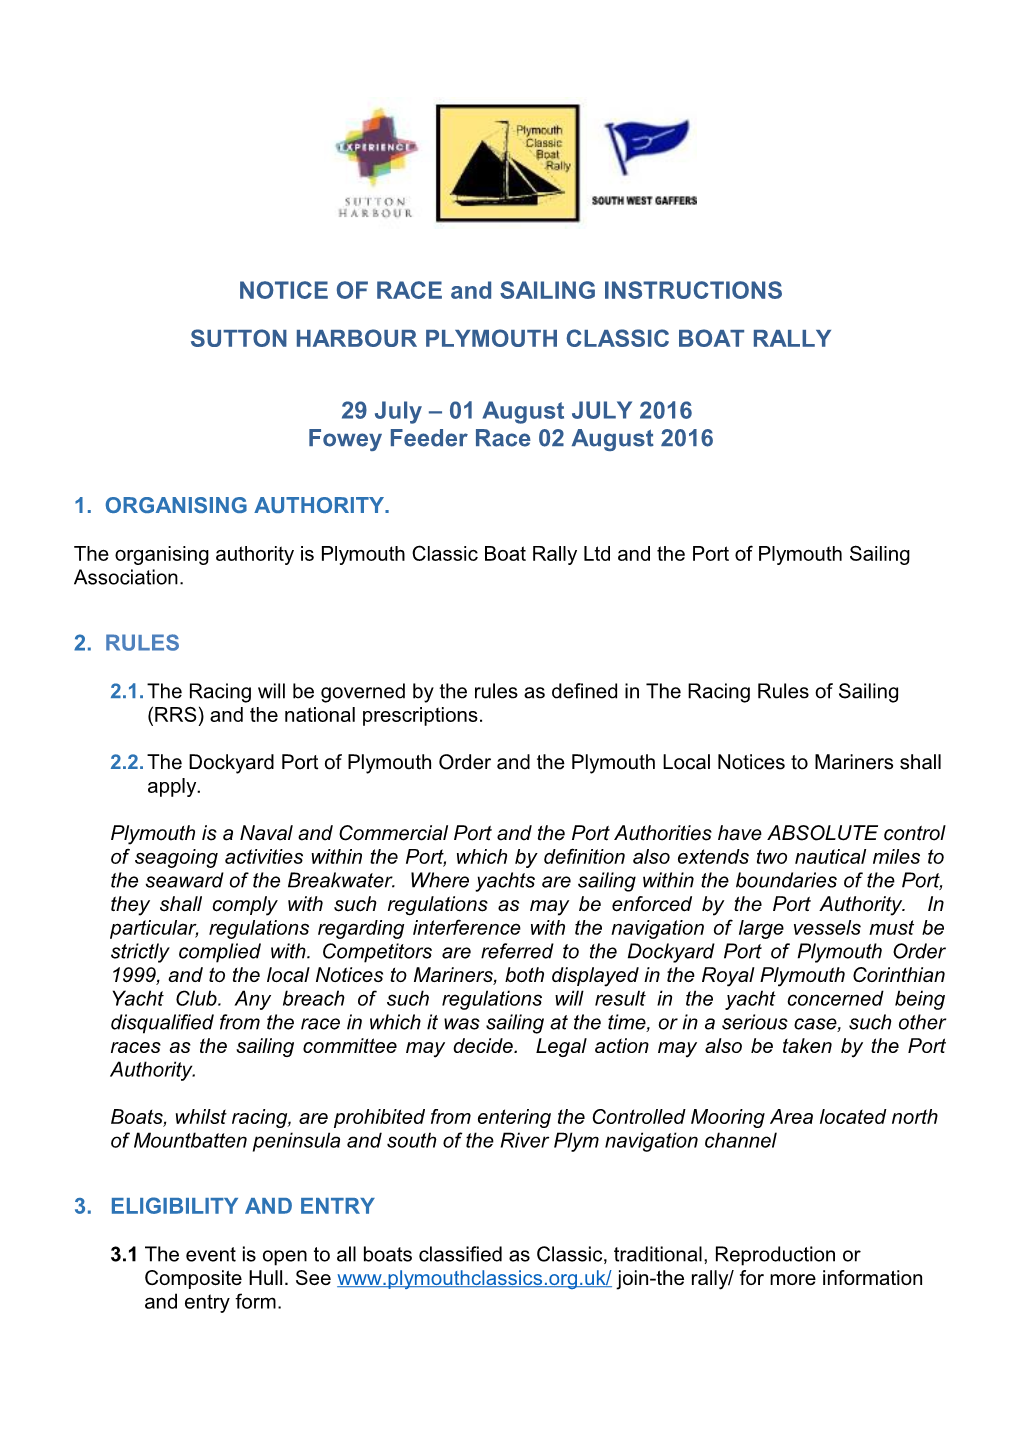 NOTICE of RACE and SAILING INSTRUCTIONS